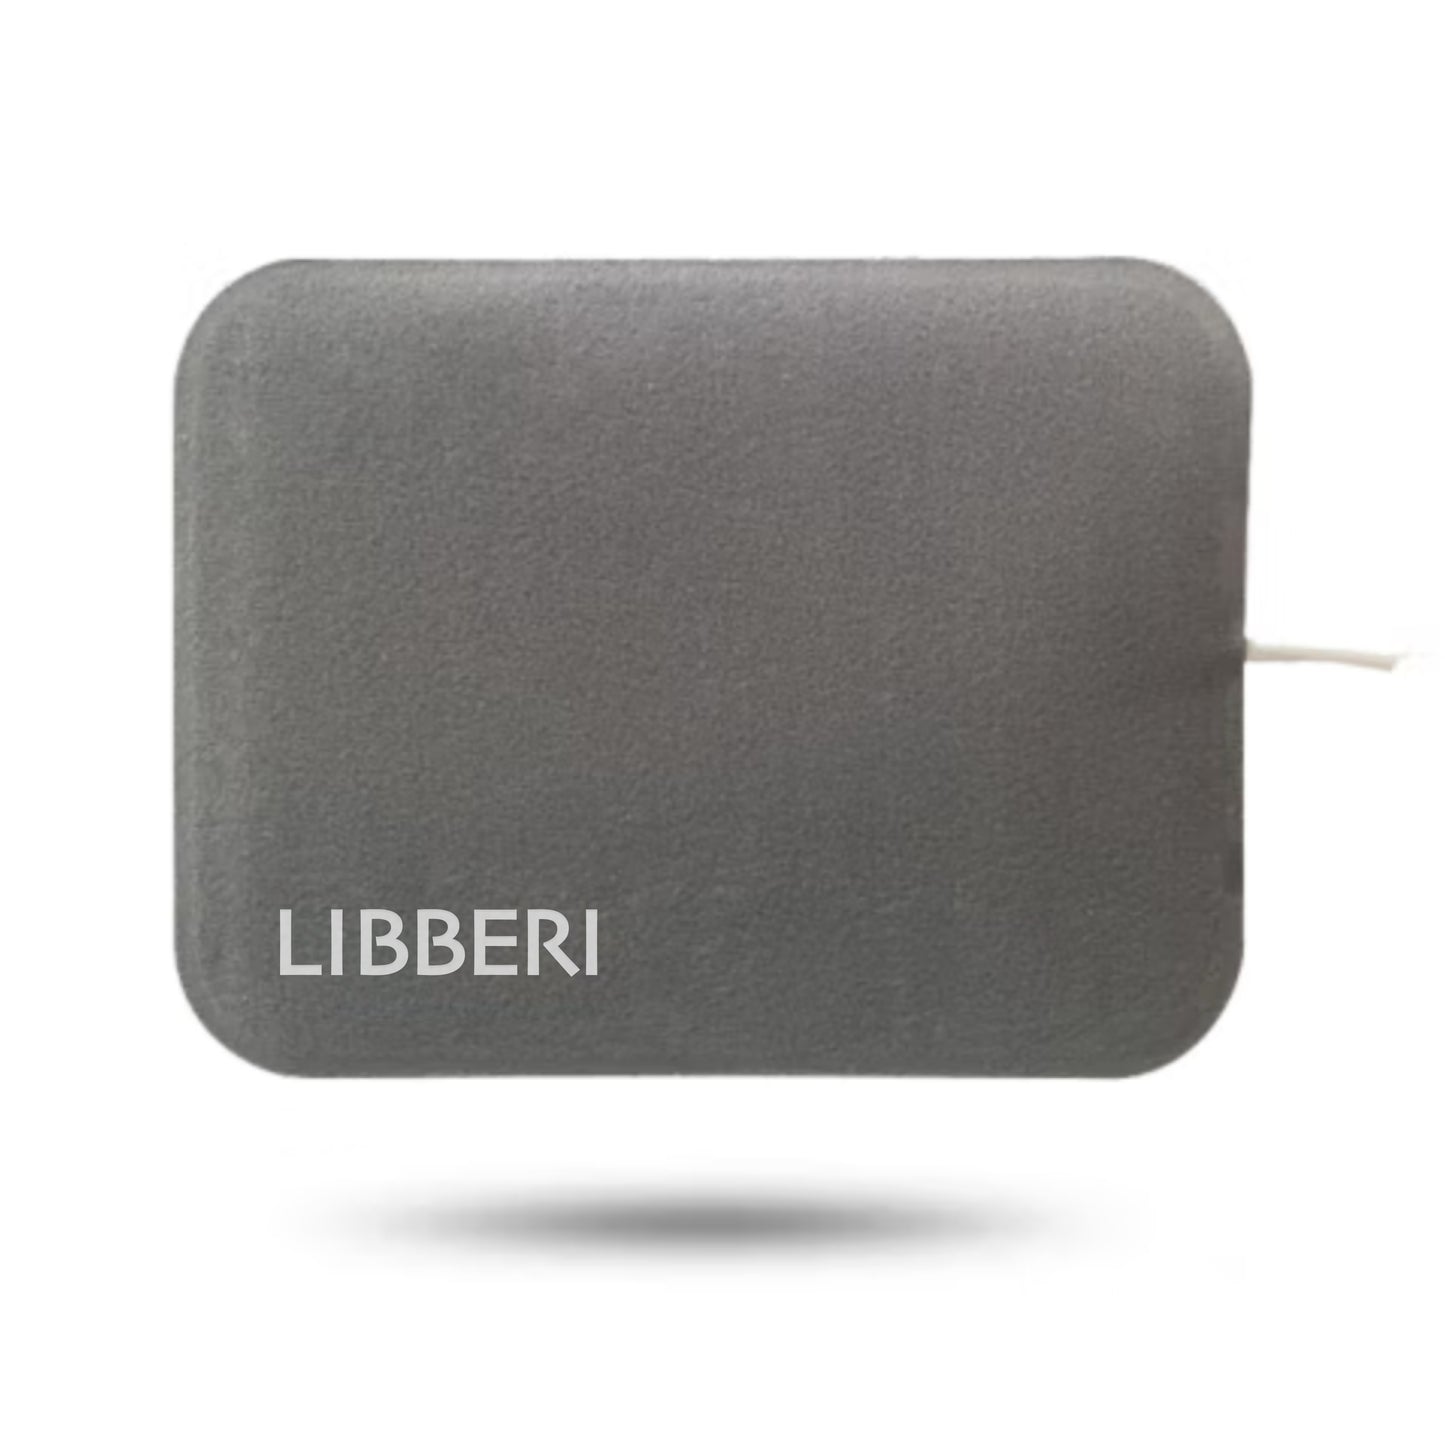 LIBBERI Maternity Support Belts for Medical Purposes